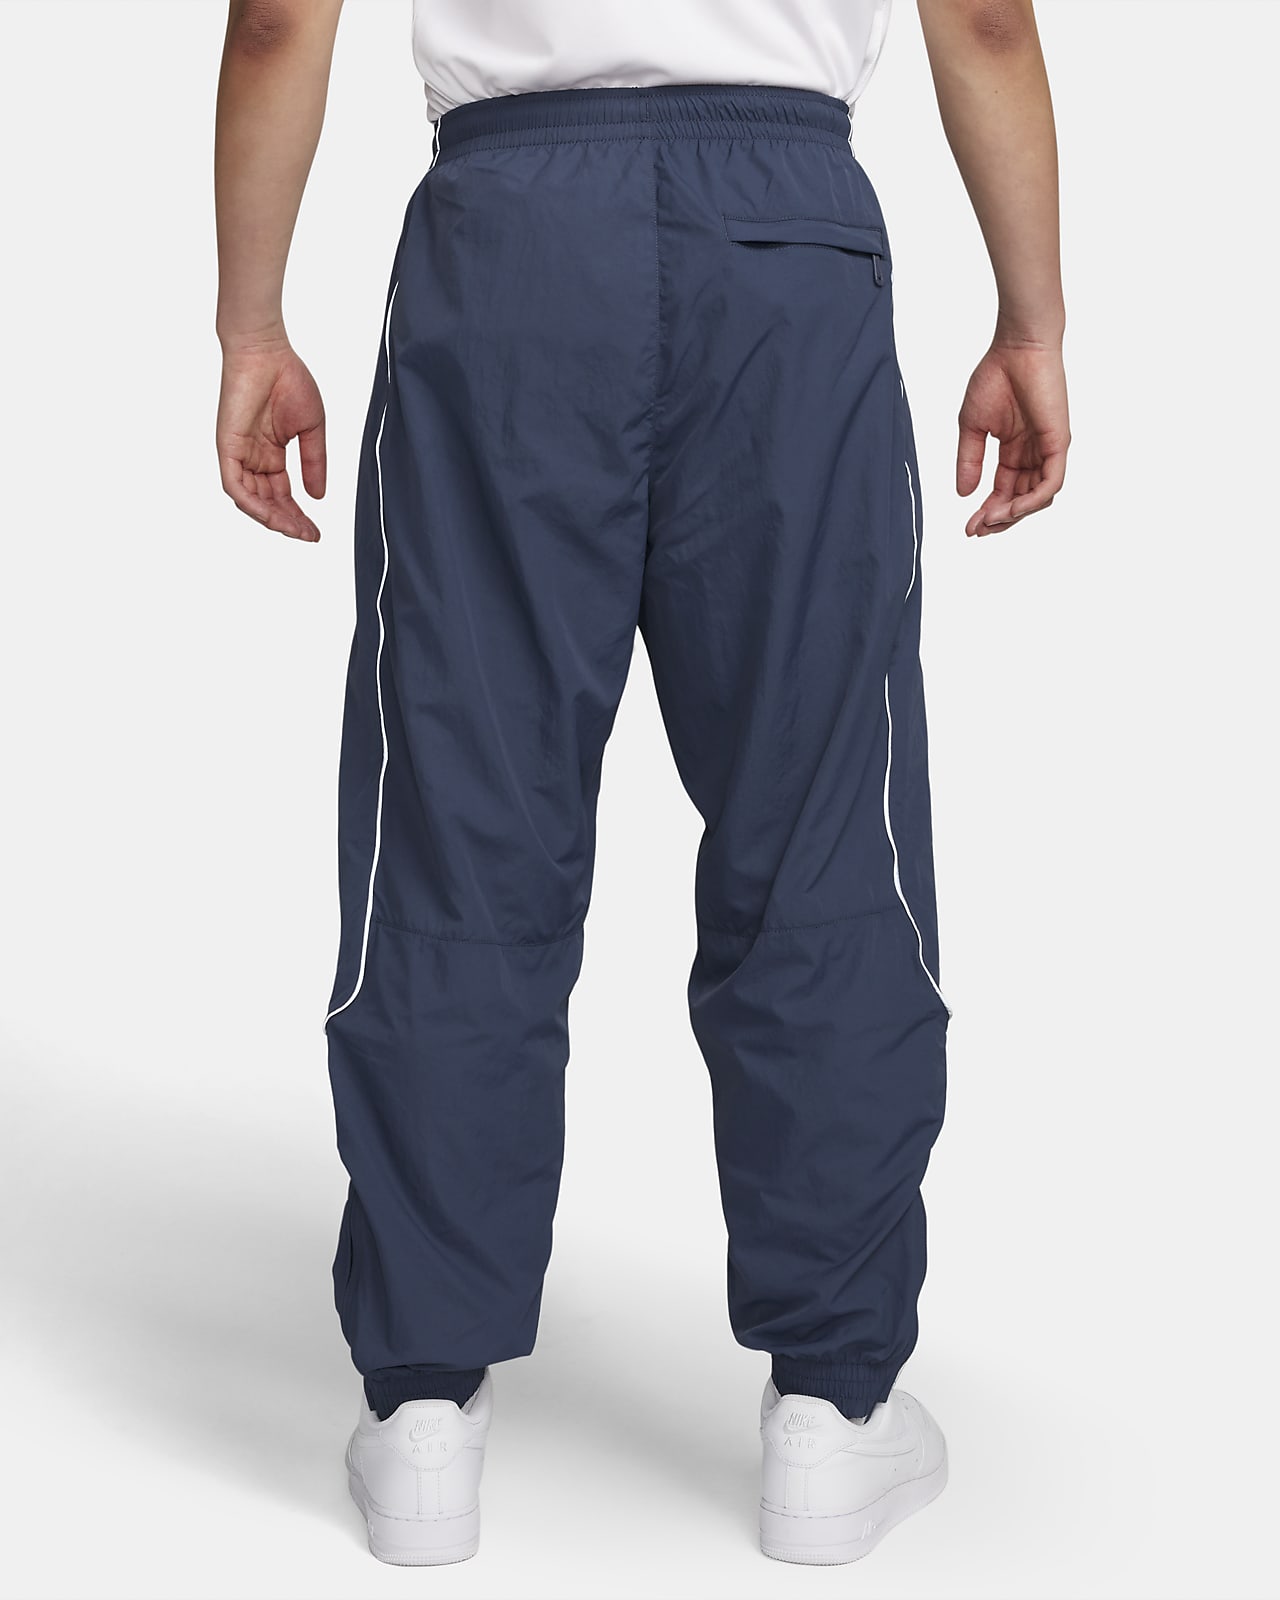 The Best Hiking Trousers for Men by Nike. Nike NL